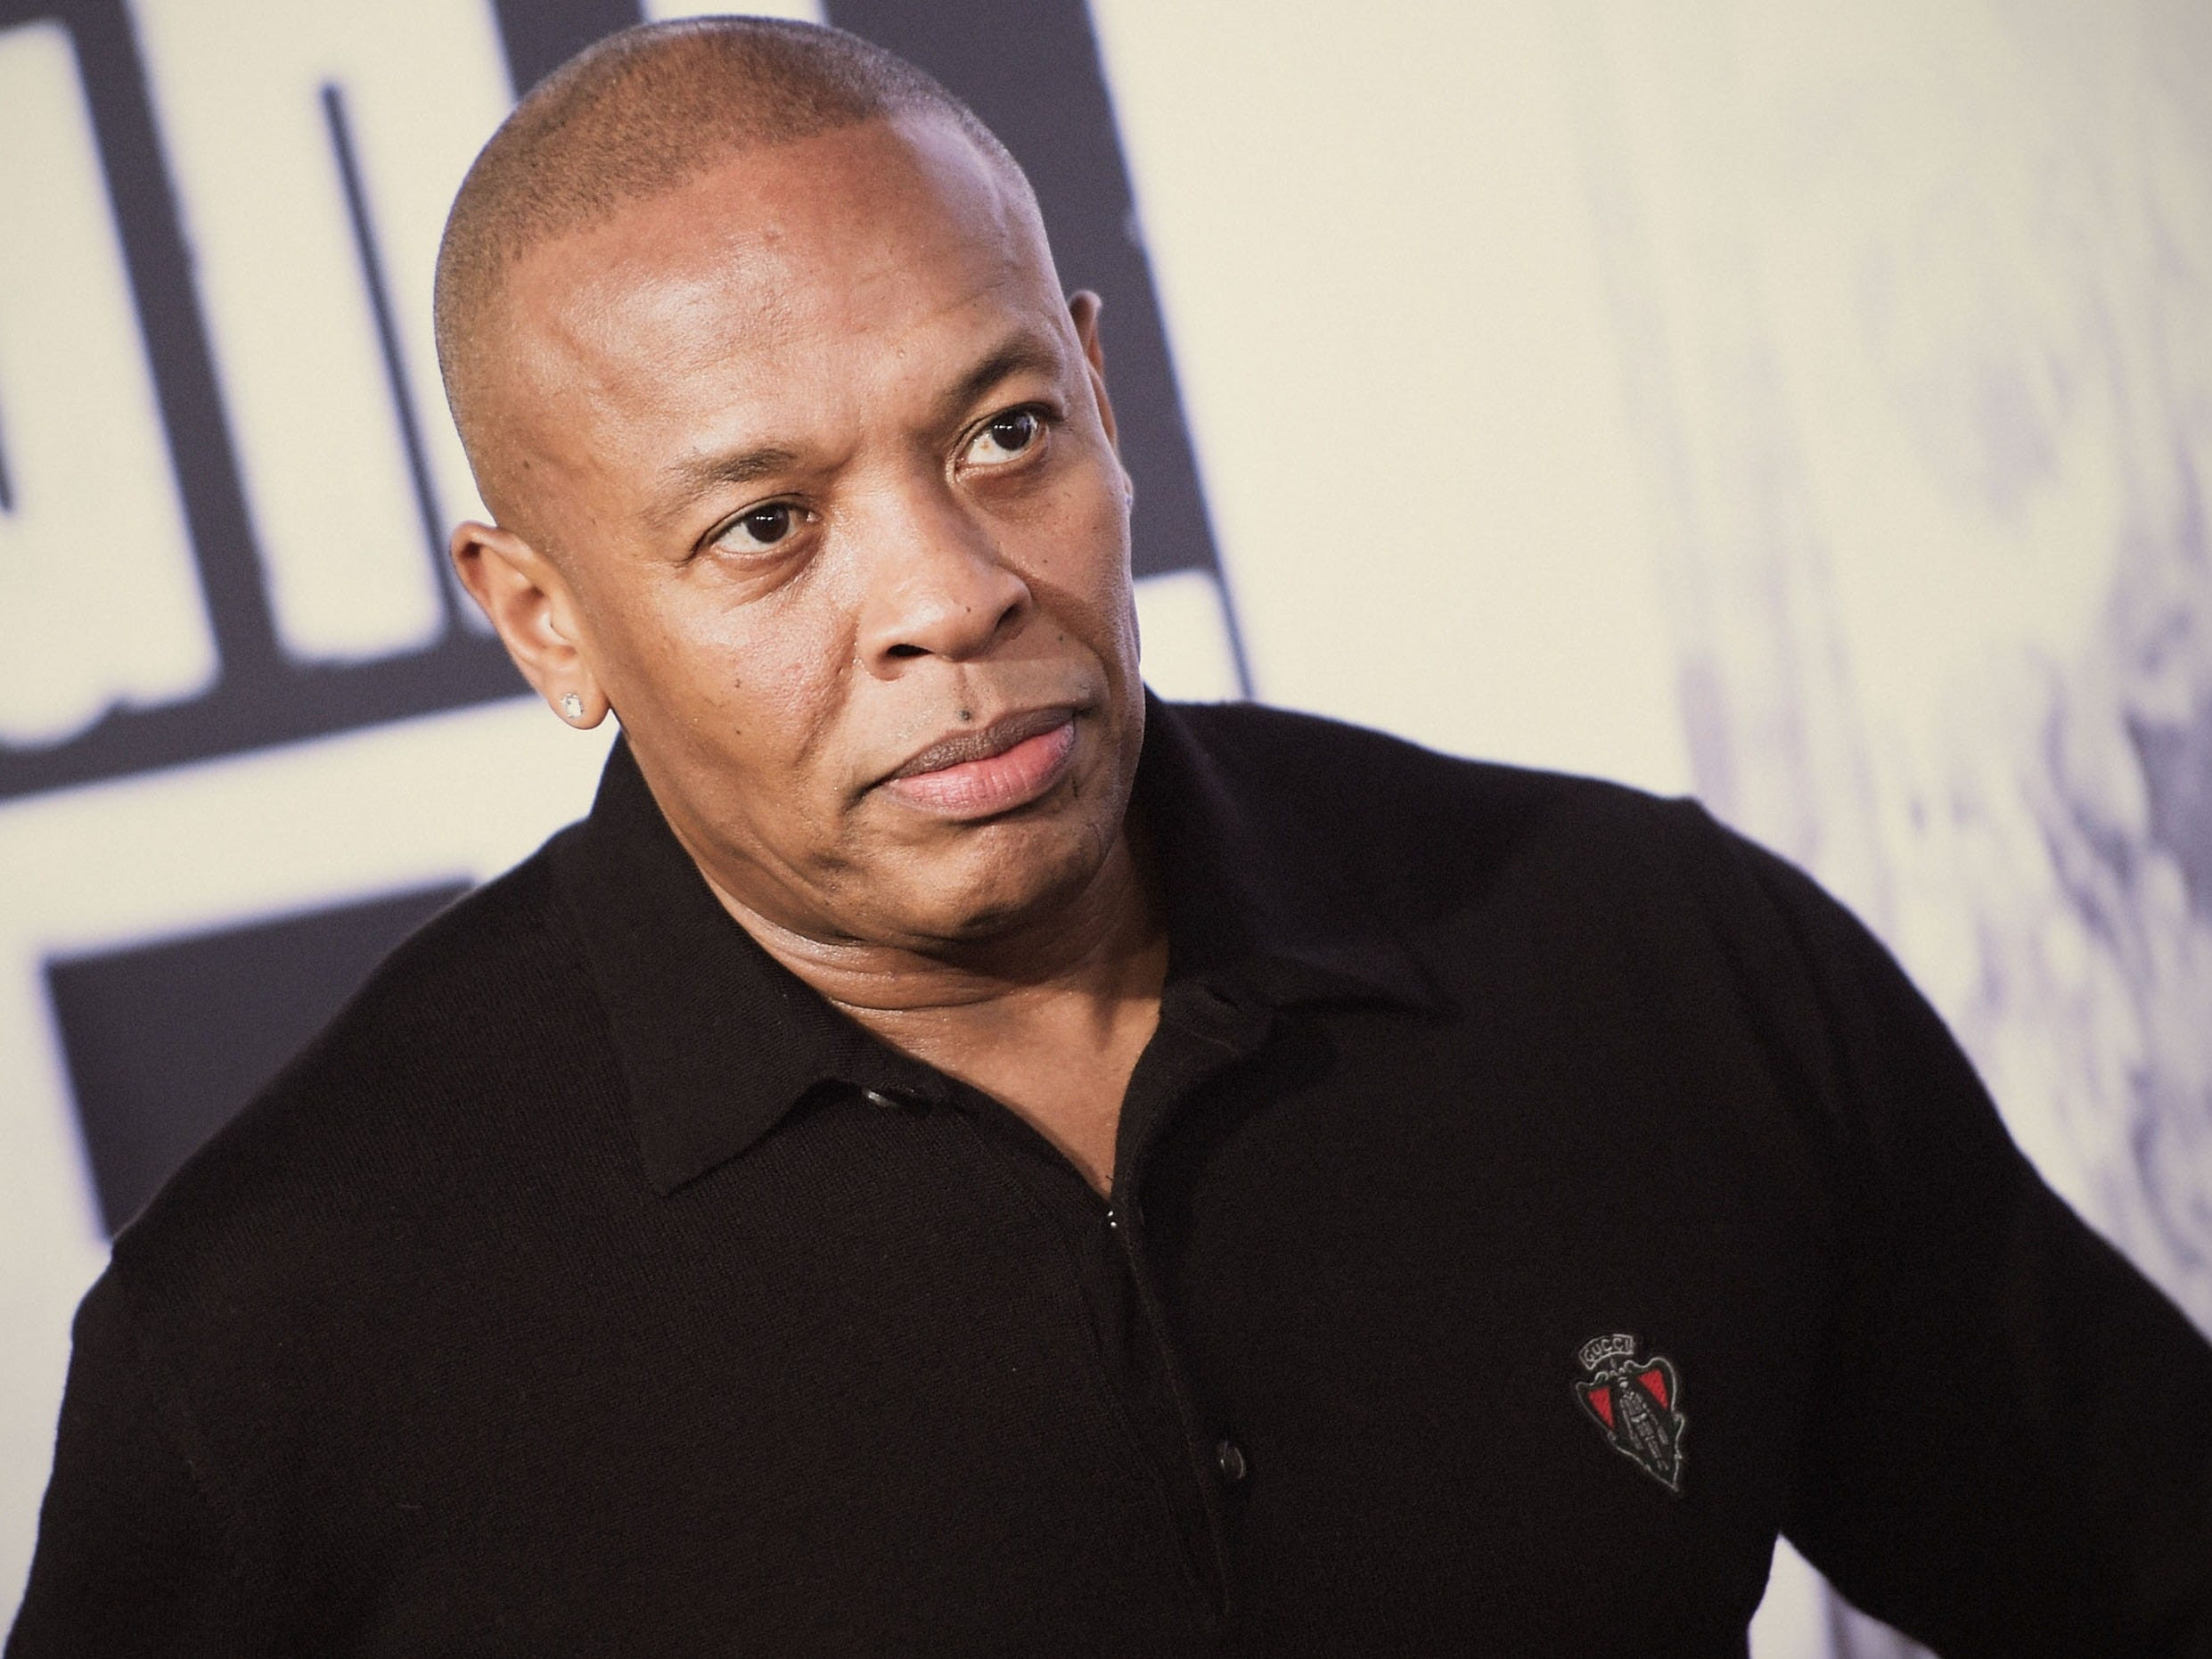 Music Producer, Dr. Dre set to complete deal to sell his music for $200 Million